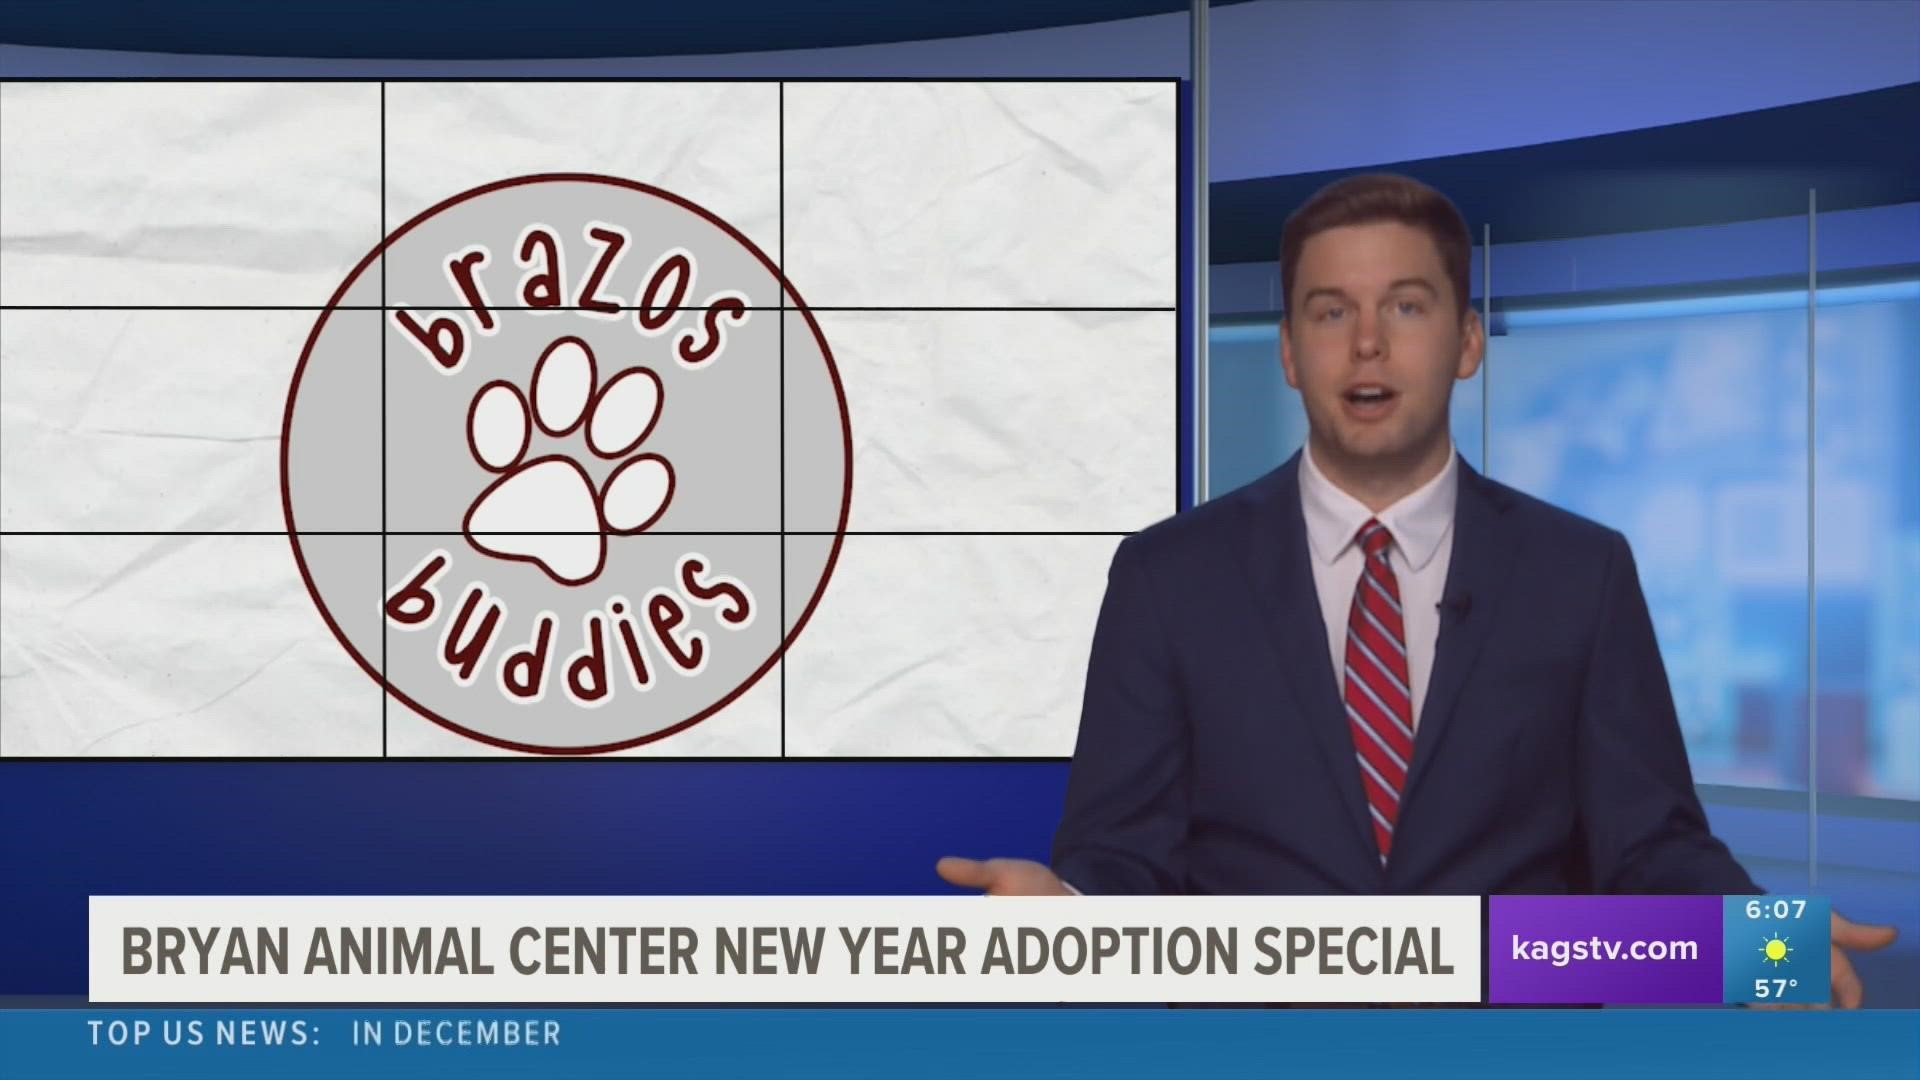 Ring in the new year by adopting a new furry friend from a local shelter.